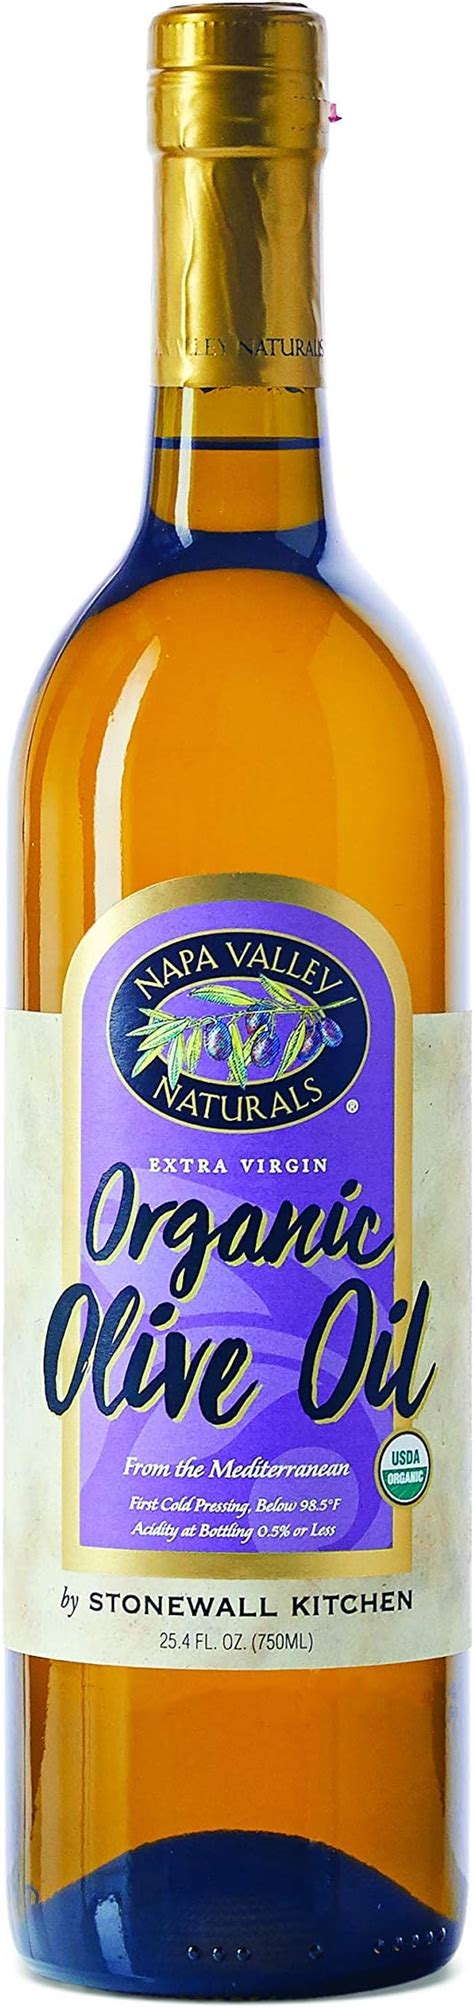 napa valley naturals gourmet organic extra virgin olive oil cold pressed made